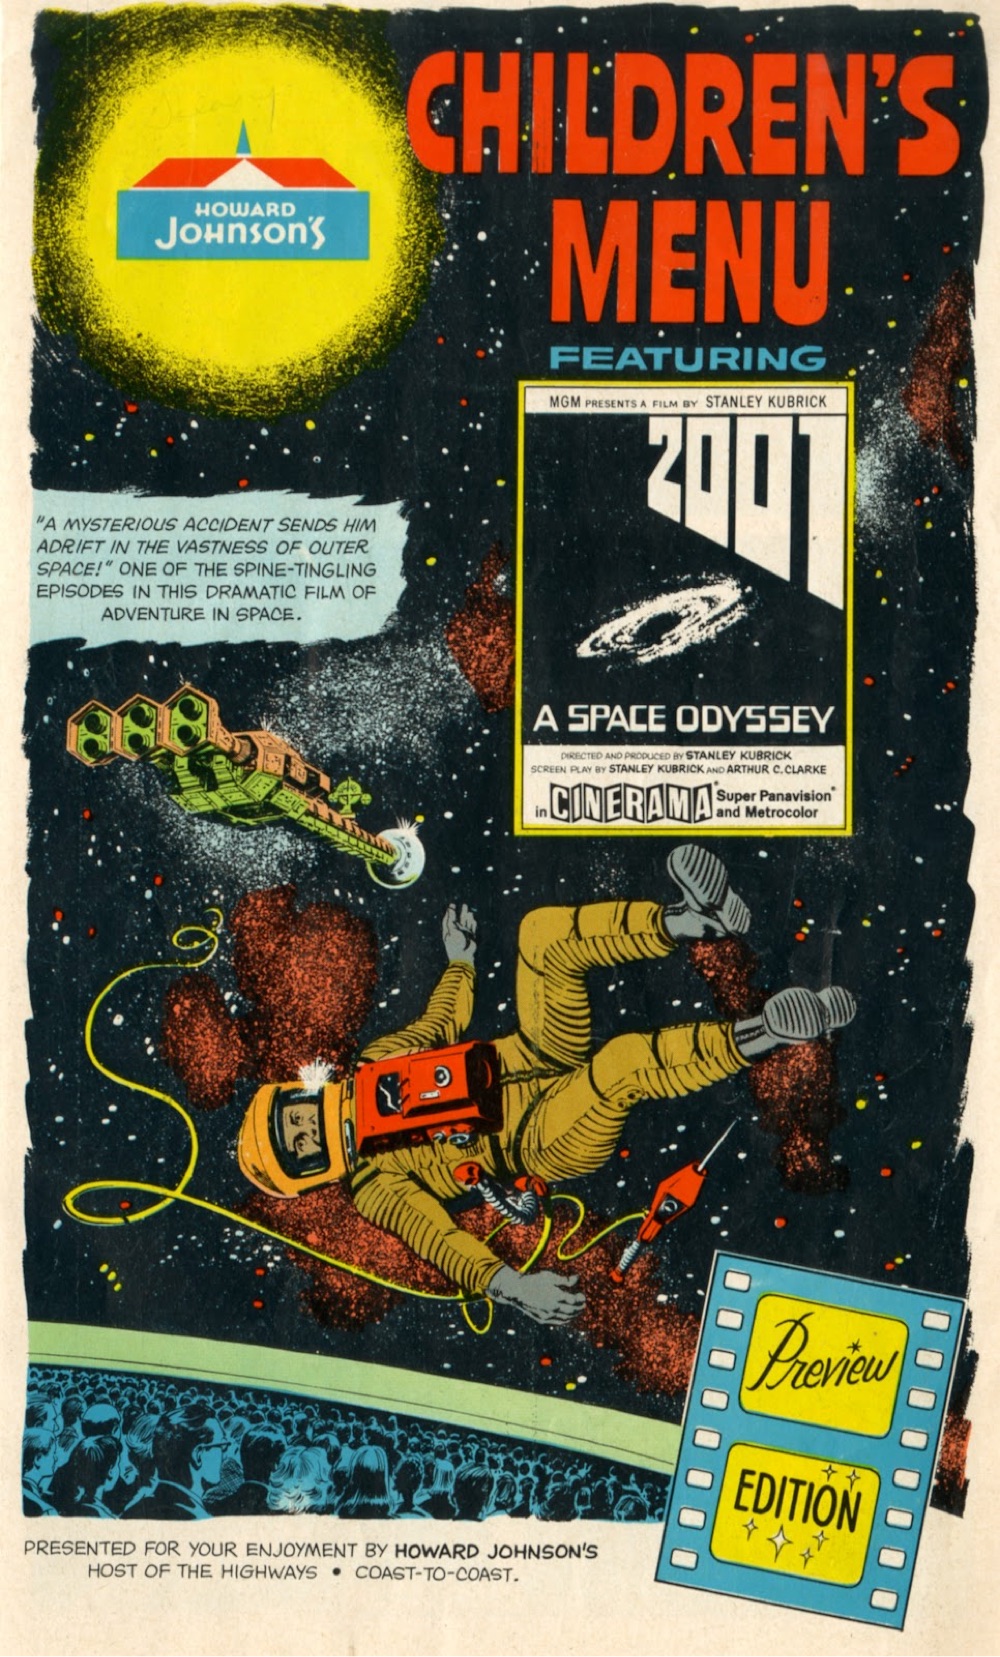 1968 Howard Johnson's Kids Menu Featuring 2001: A Space Odyssey